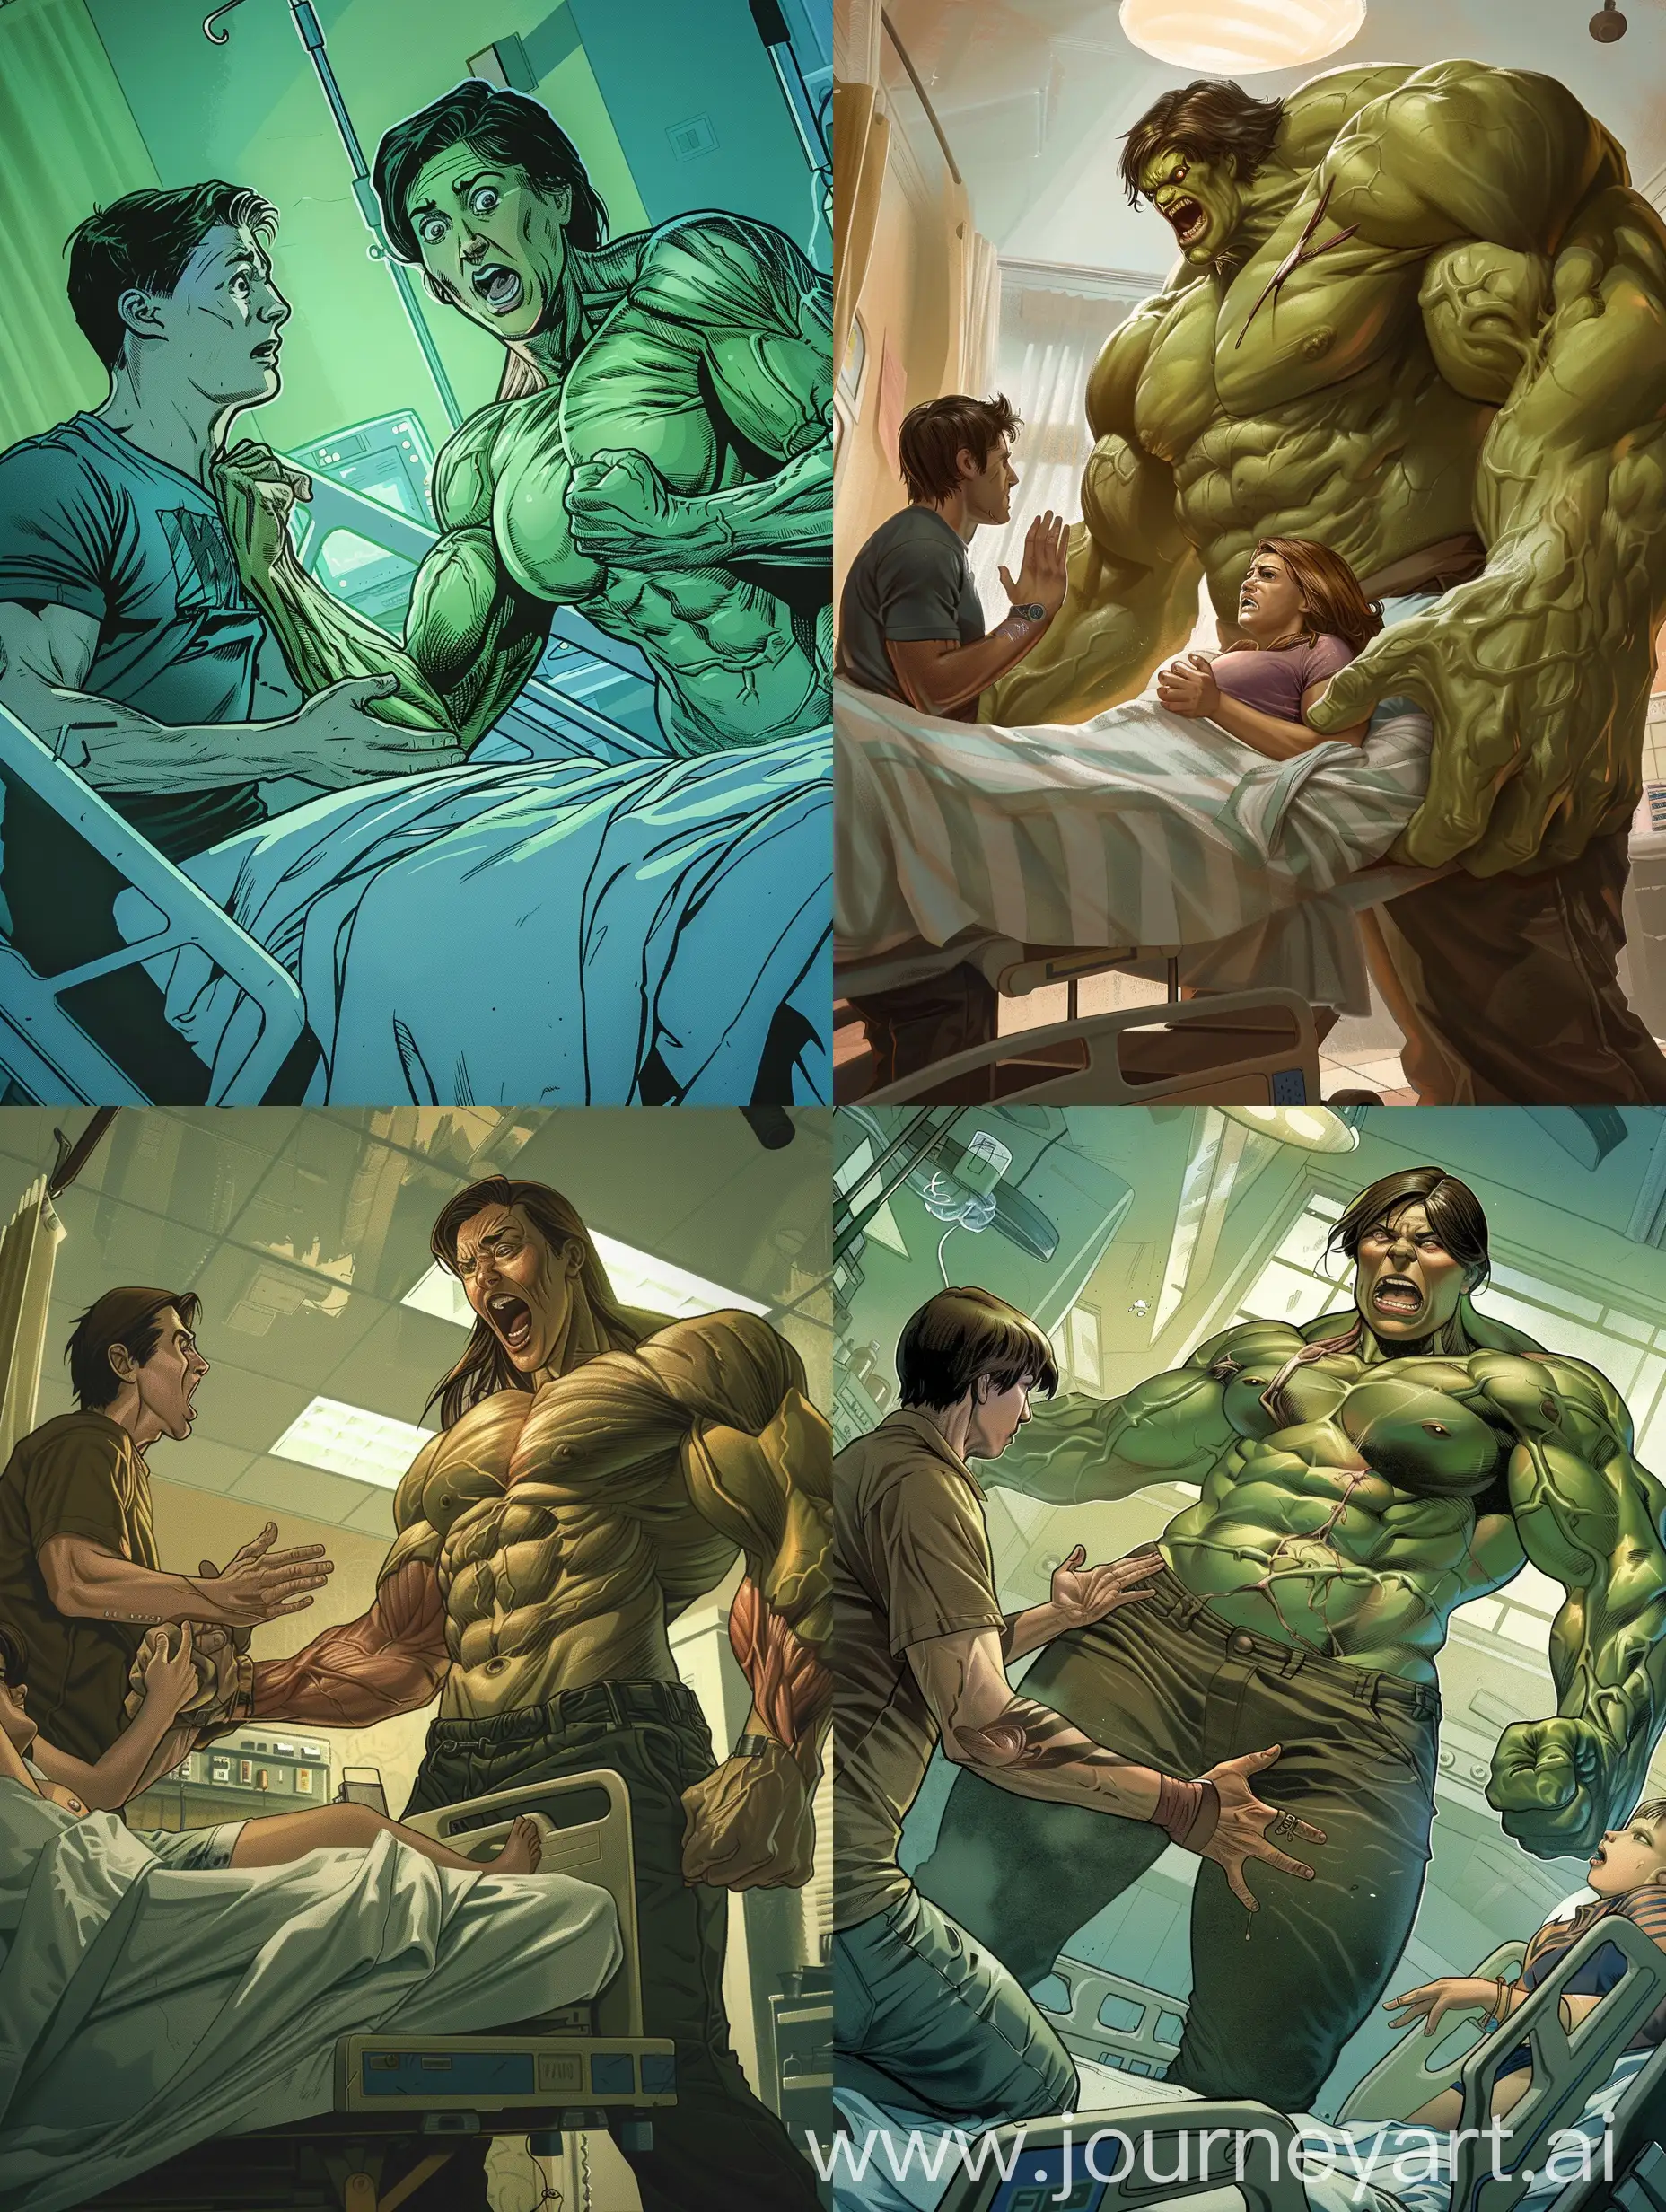 A captivating illustration of a woman undergoing a unique transformation. The woman is on a hospital bed, her muscles rapidly growing as she gives birth to the metamorphosis of a superhuman. Her boyfriend, visibly shocked and amazed, clings to her hand for support. The atmosphere is a mix of suspense, anticipation, and awe, as the woman's body reshapes itself into the powerful she Hulk-like figure.,